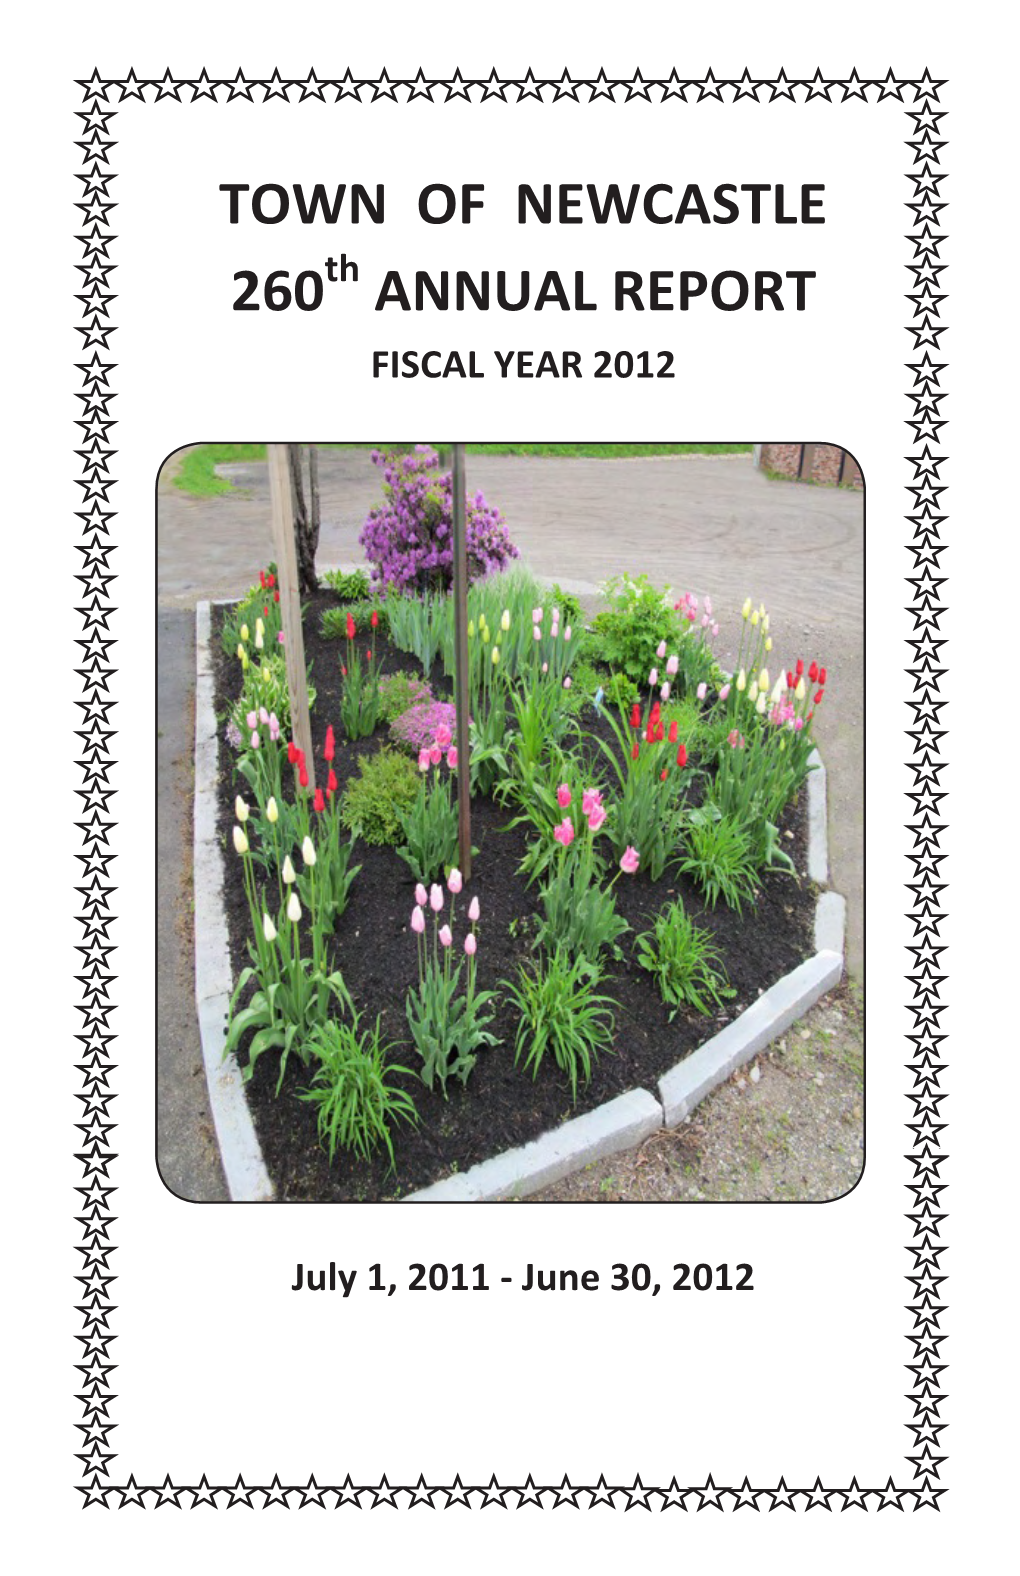 Town of Newcastle 260 Annual Report